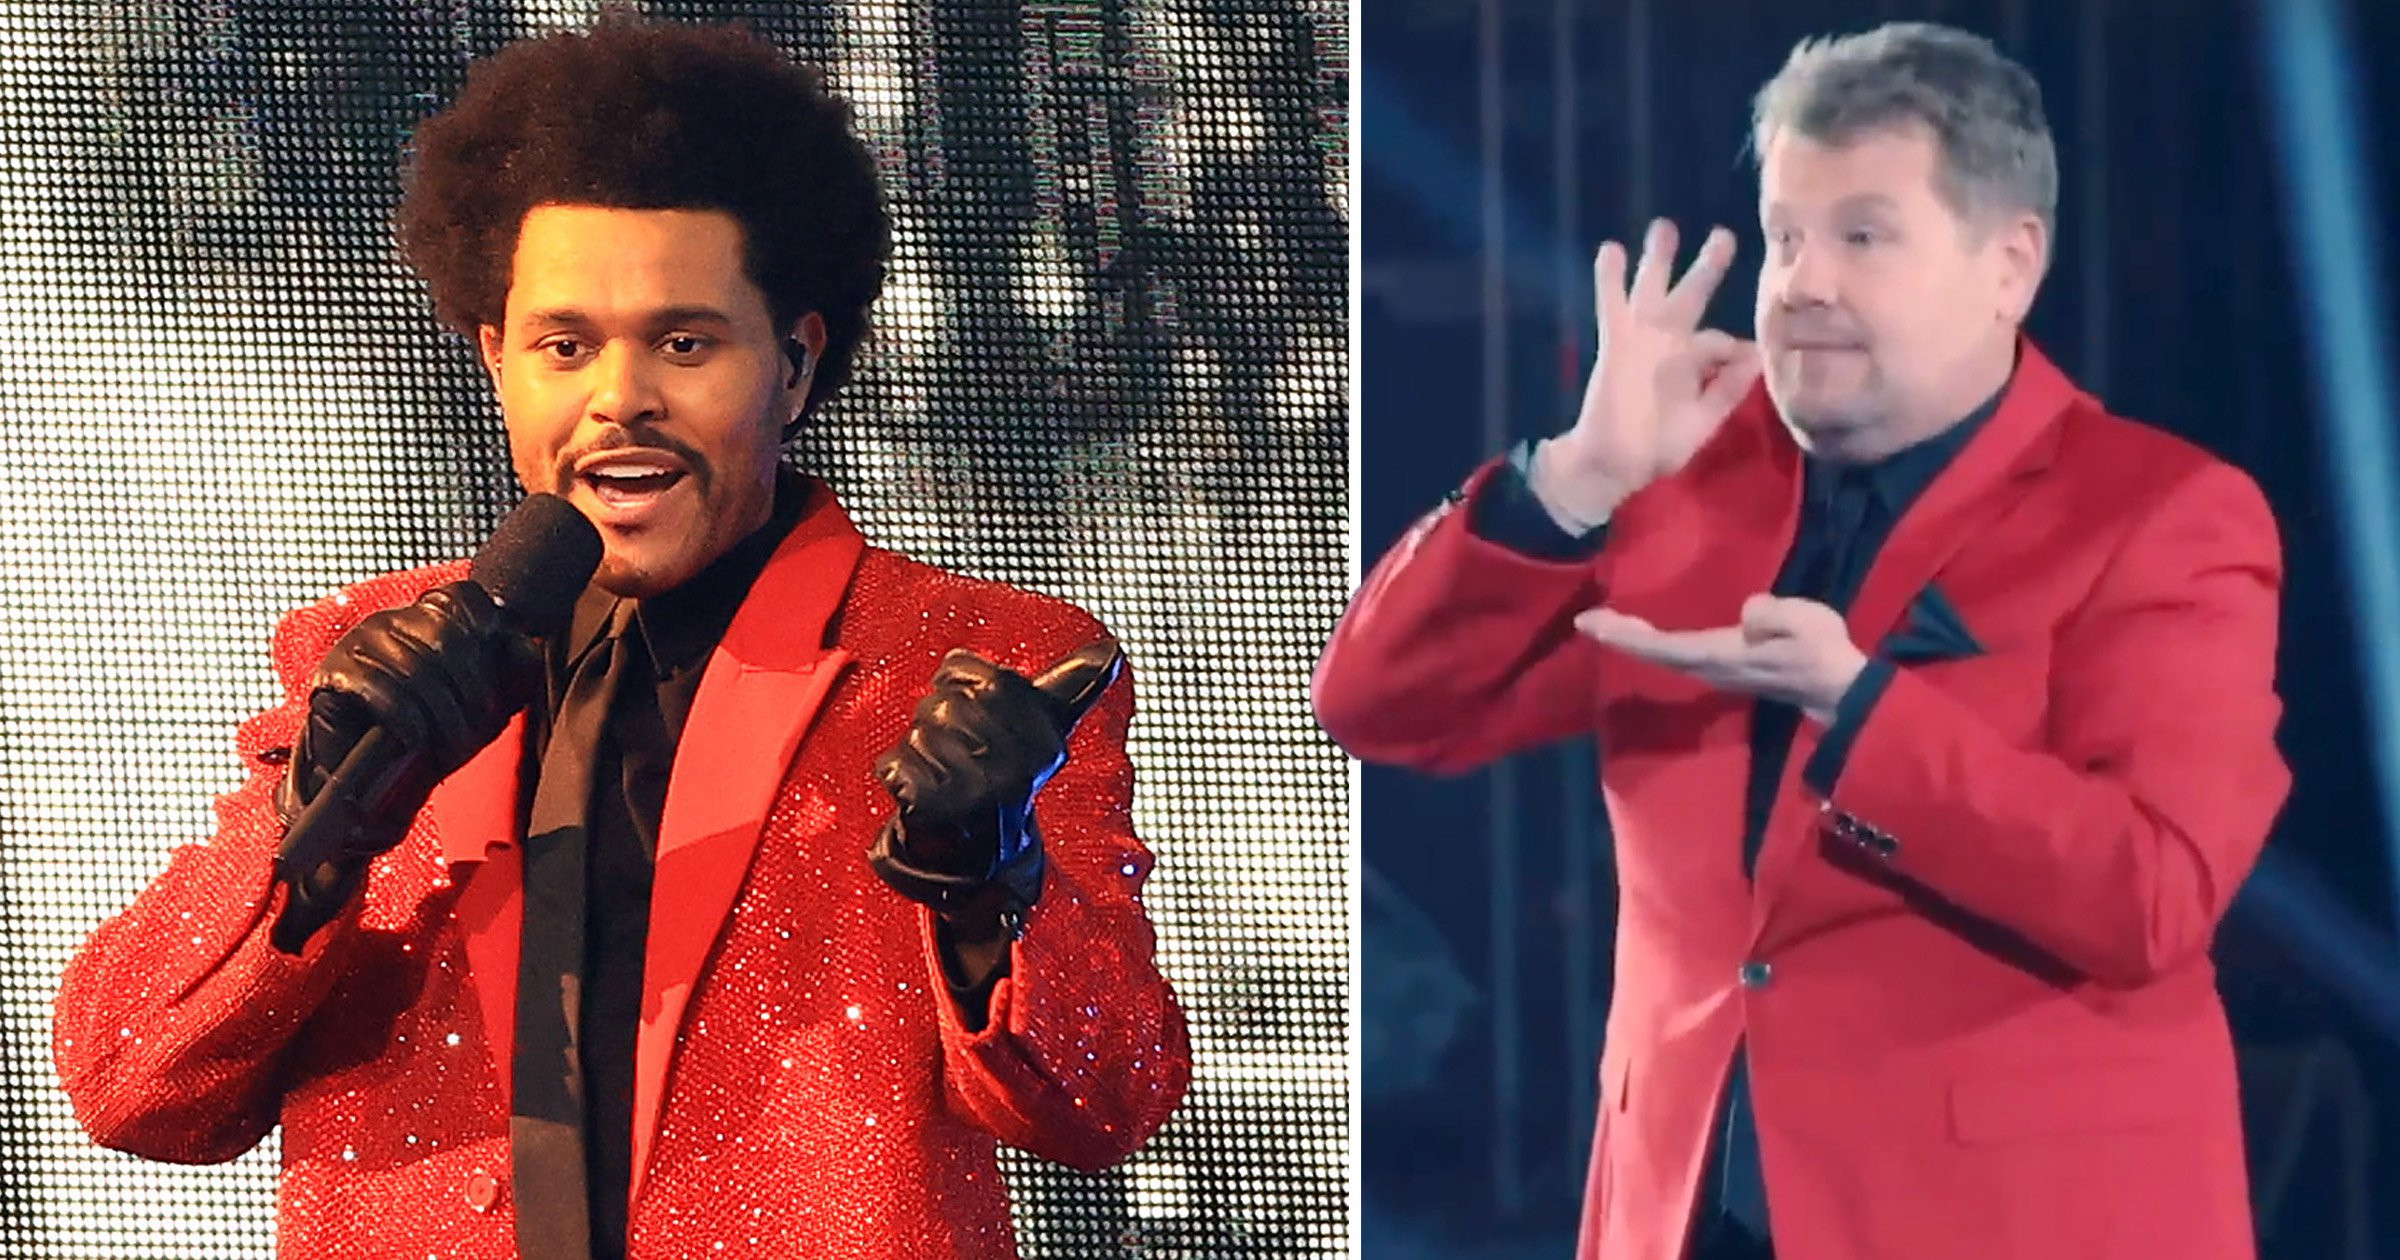 James Corden matches with The Weeknd as he takes credit for epic Super Bowl halftime show in backstage clip